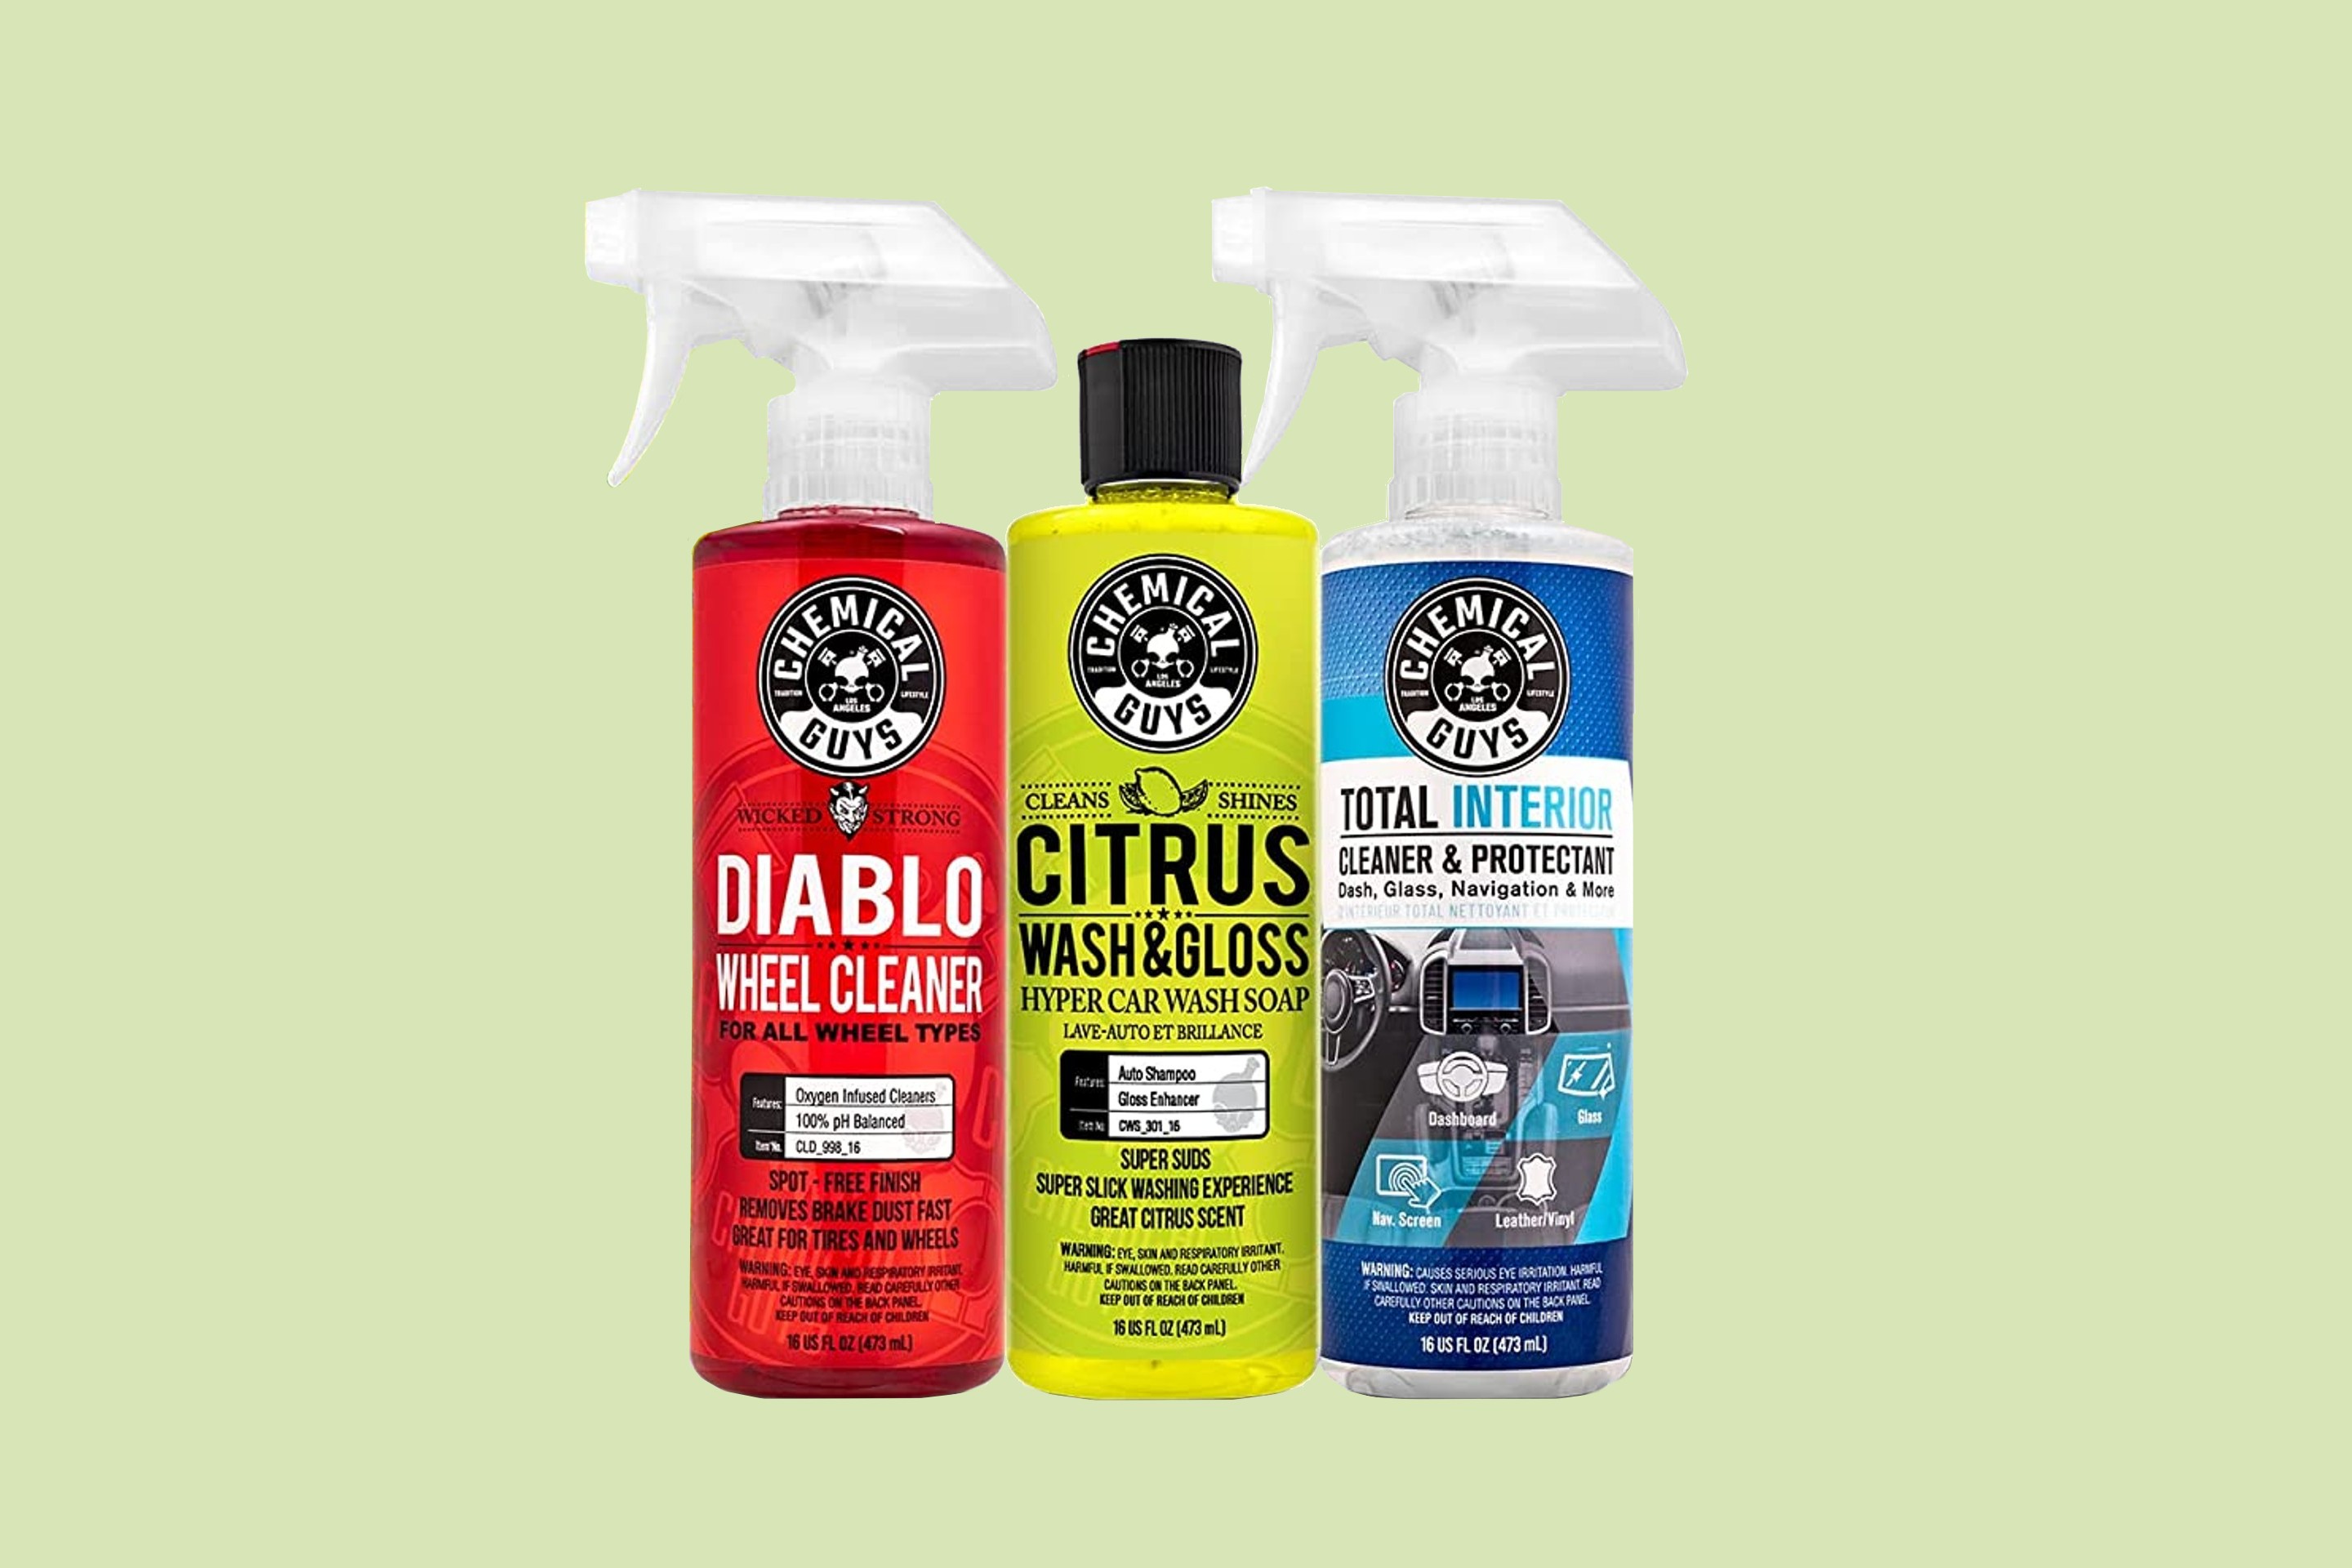 Dozens of Chemical Guys car wash products are 15% off or more right now